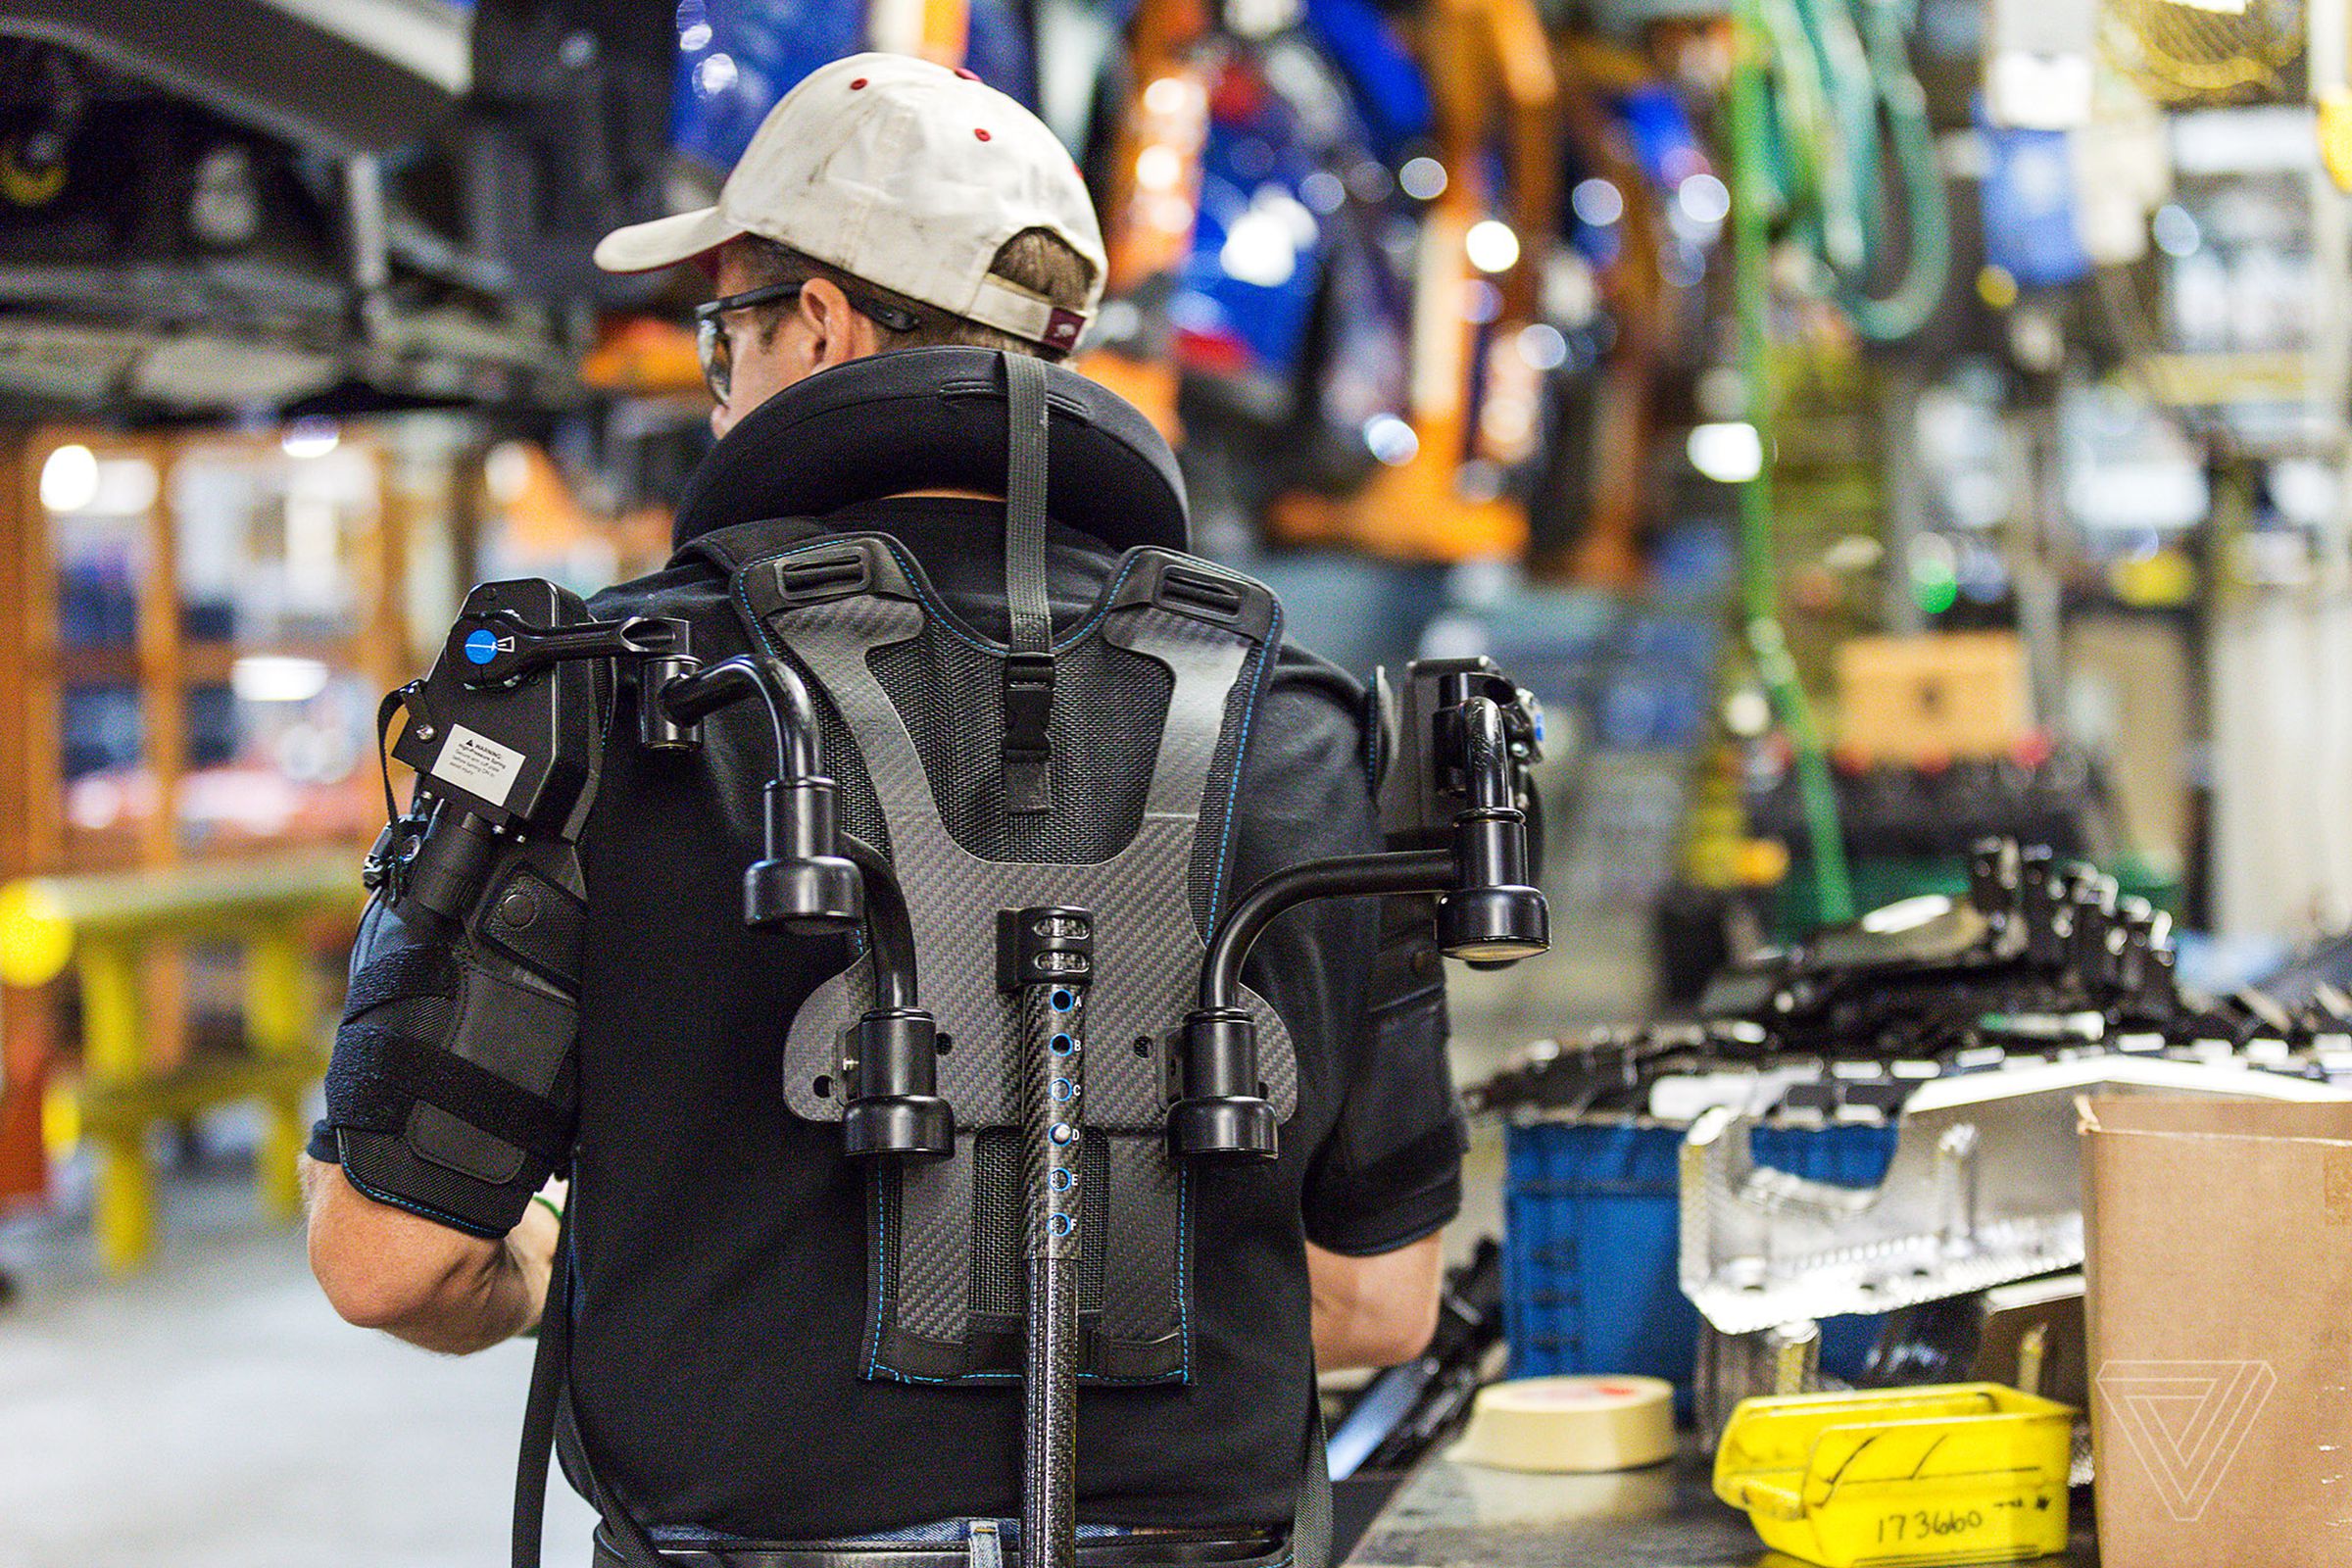 Ford assembly line worker Paul Collins wears an Ekso vest.